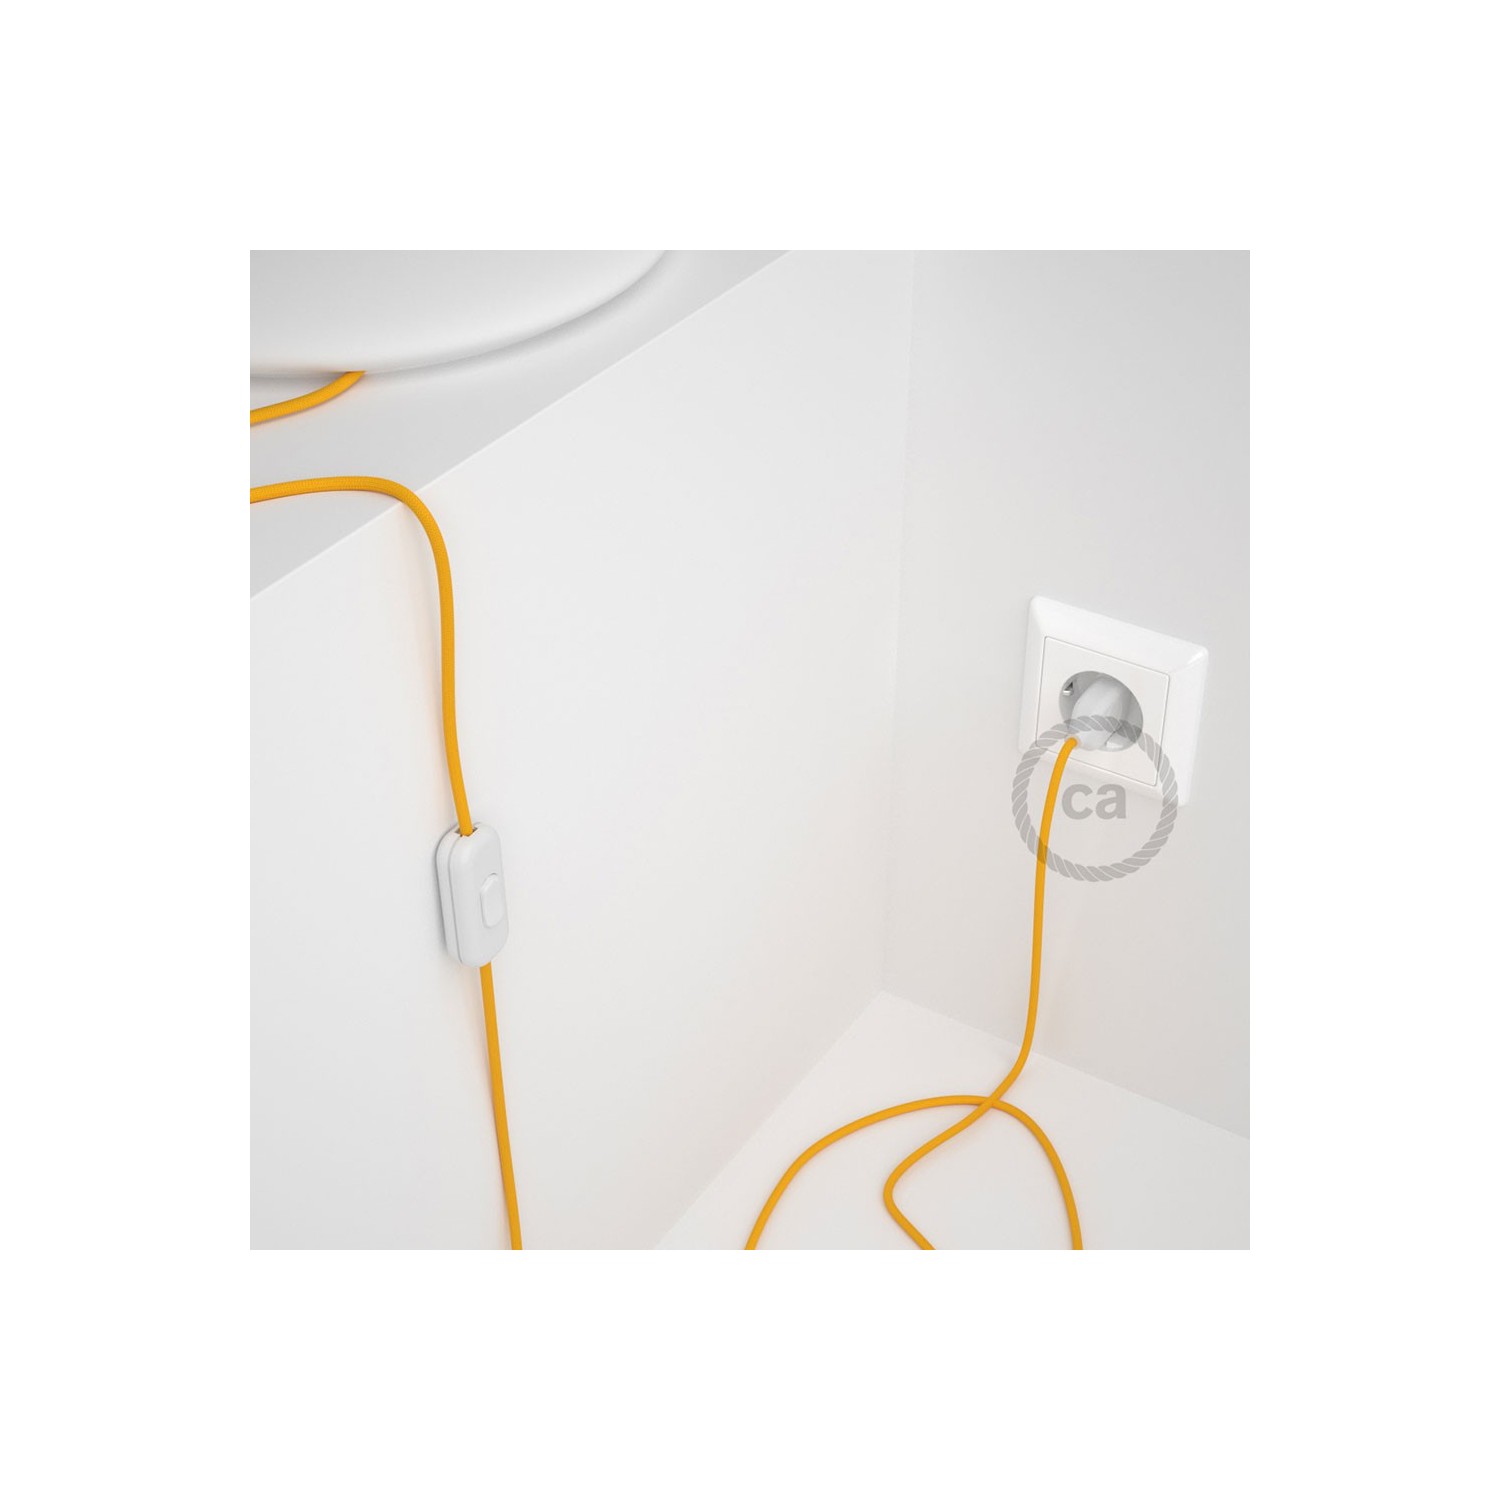 Lamp wiring, RM10 Yellow Rayon 1,80 m. Choose the colour of the switch and plug.